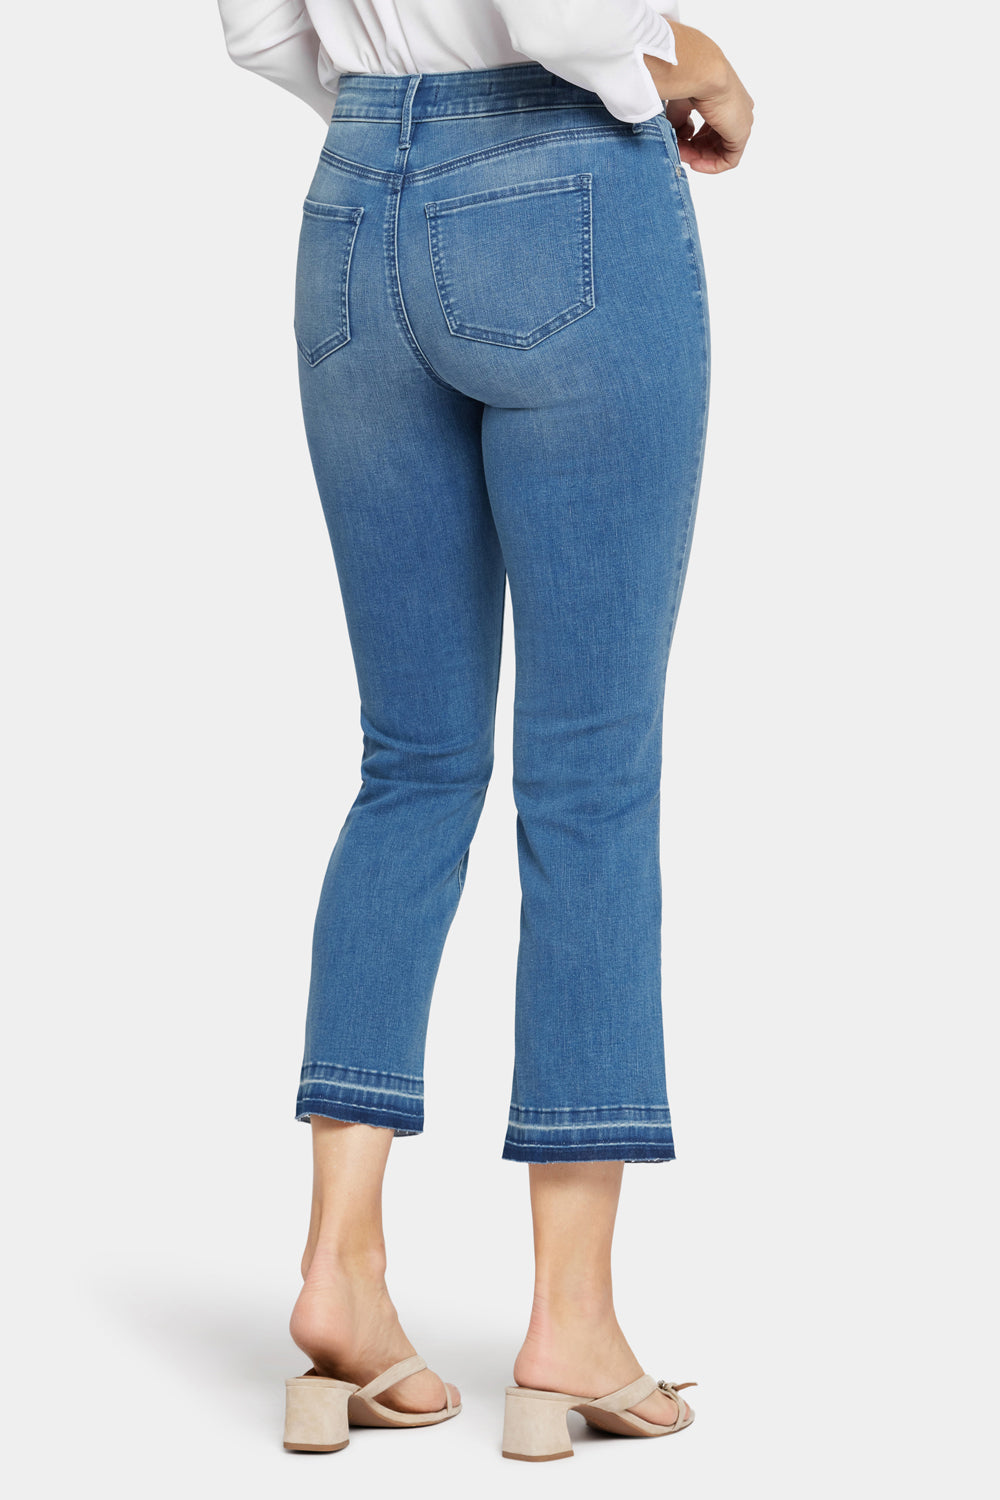 Marilyn Straight Ankle Jeans In Petite In Cool Embrace® Denim With